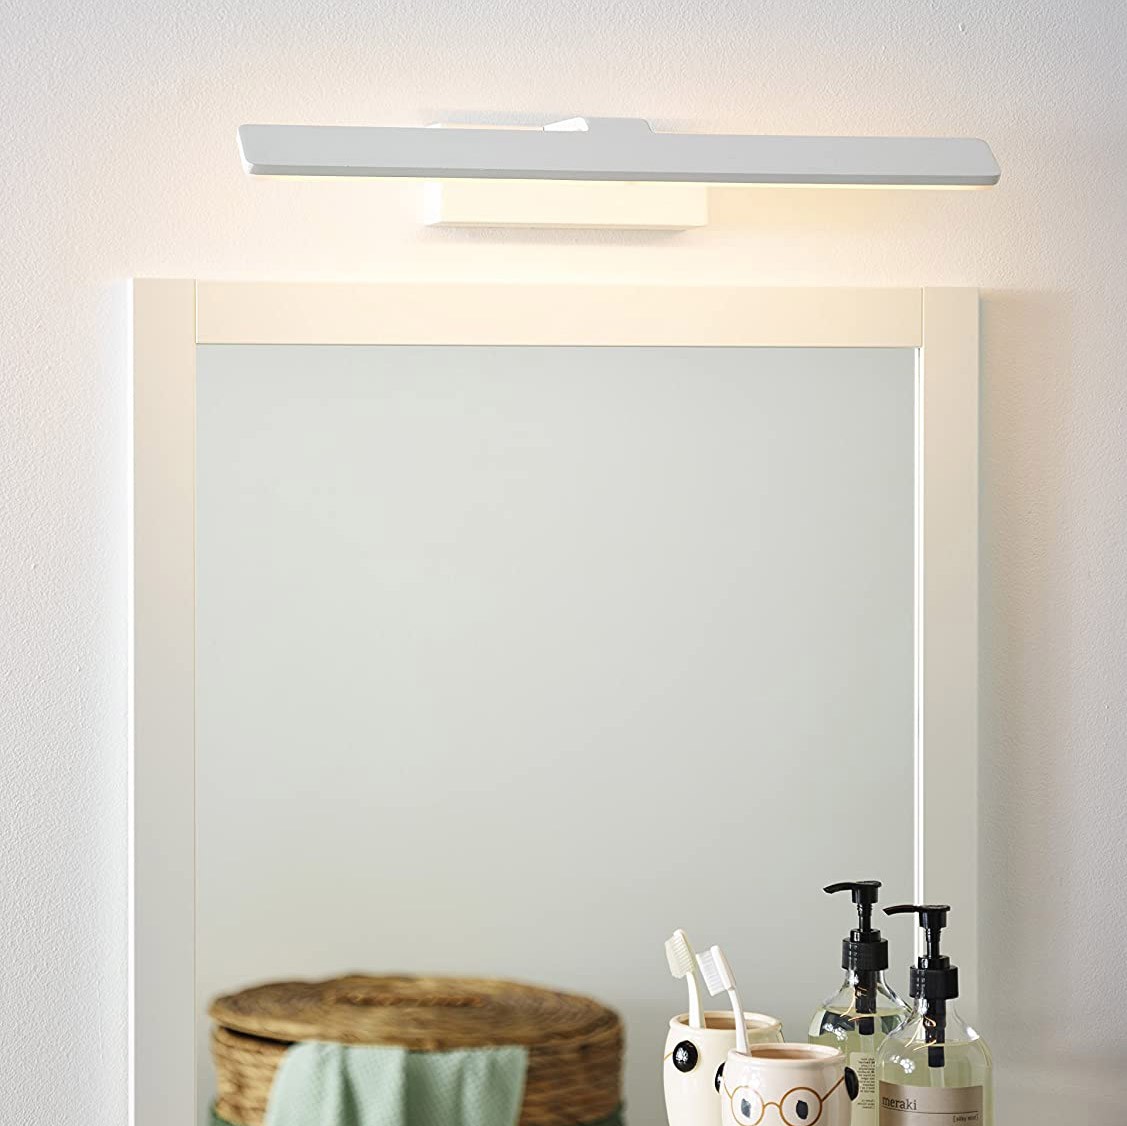 125,95 € Free Shipping | Indoor wall light 8W 47×17 cm. LED Acrylic and aluminum. White Color